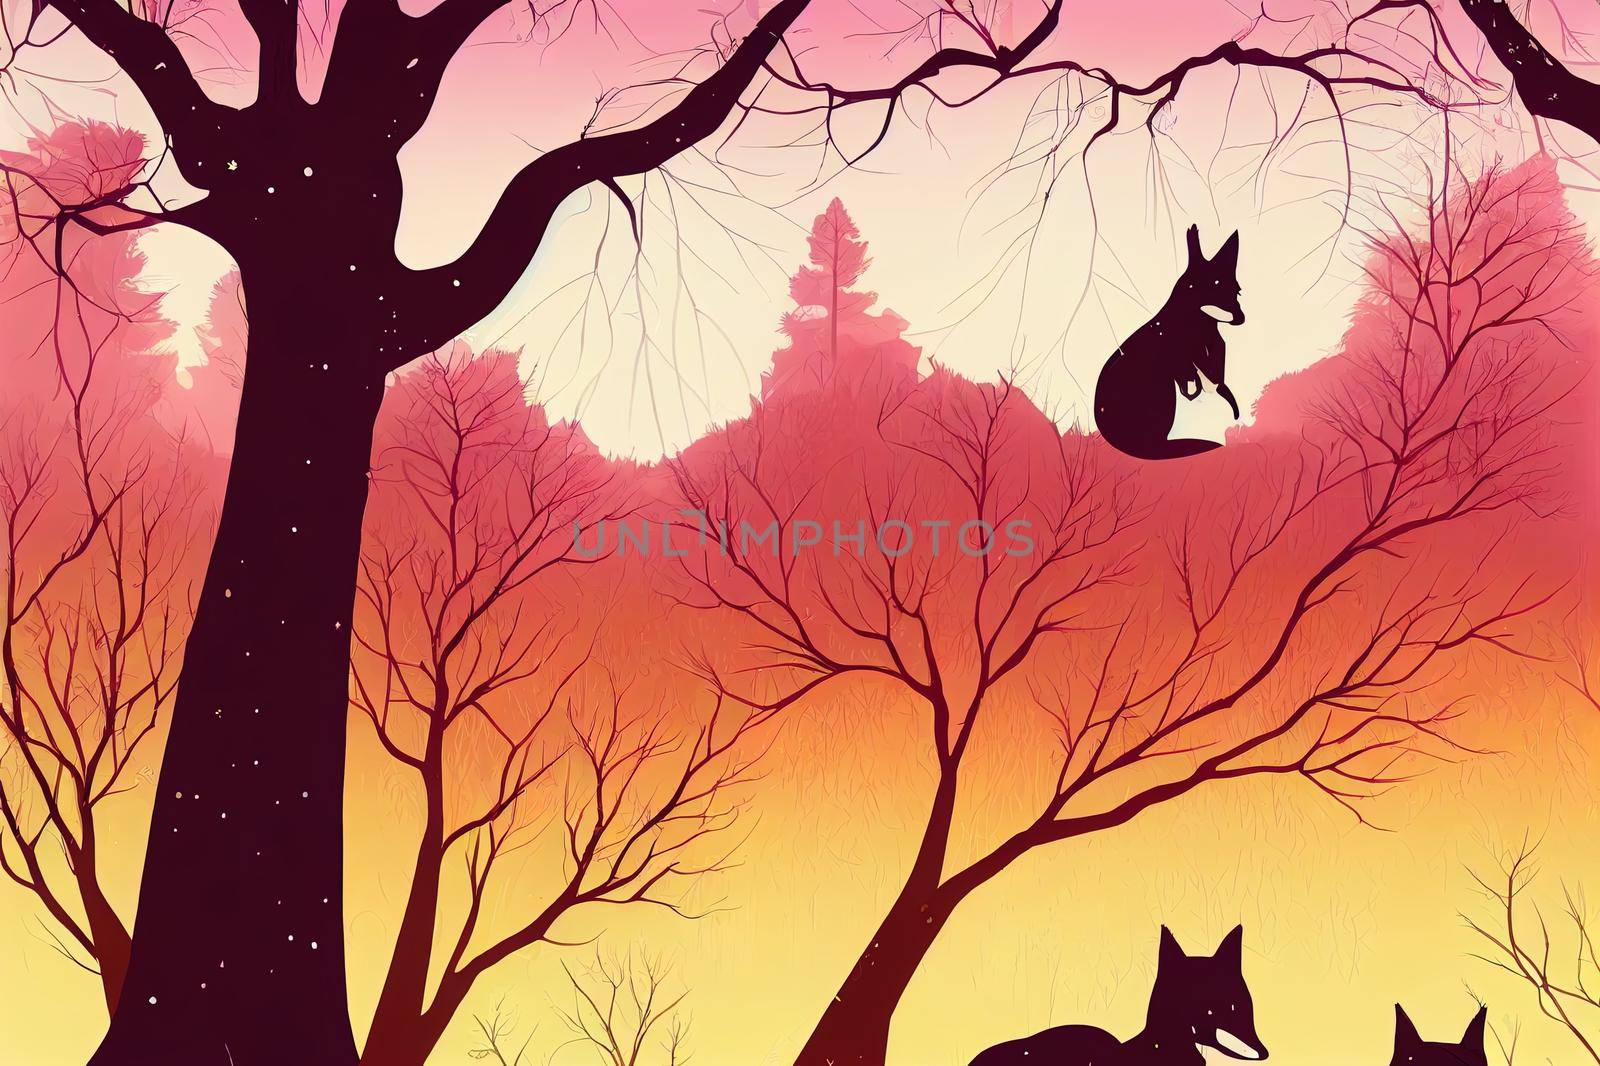 Horizontal banner of forest landscape. Fox and squirrel in by 2ragon